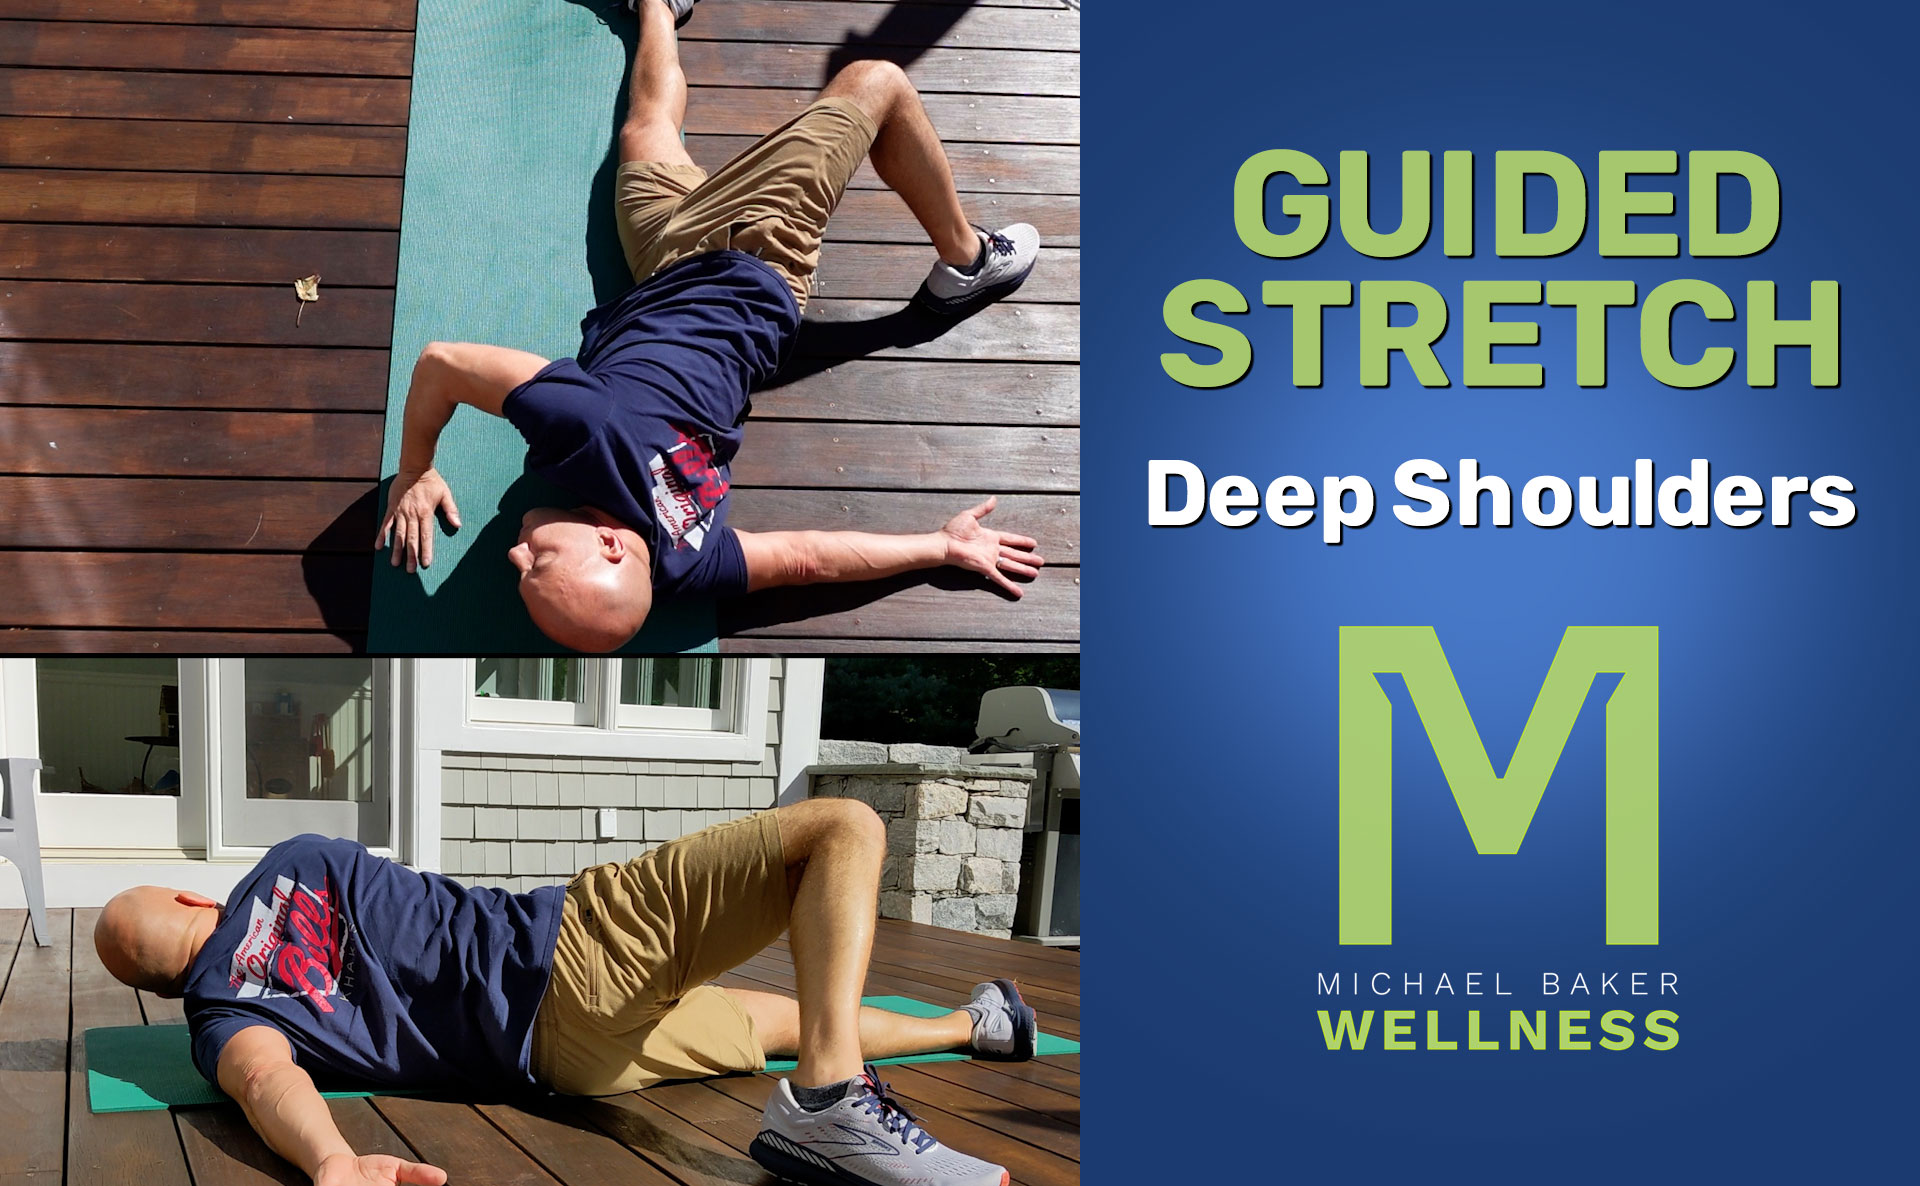 Featured image for “Guided Stretch: Deep Shoulders”